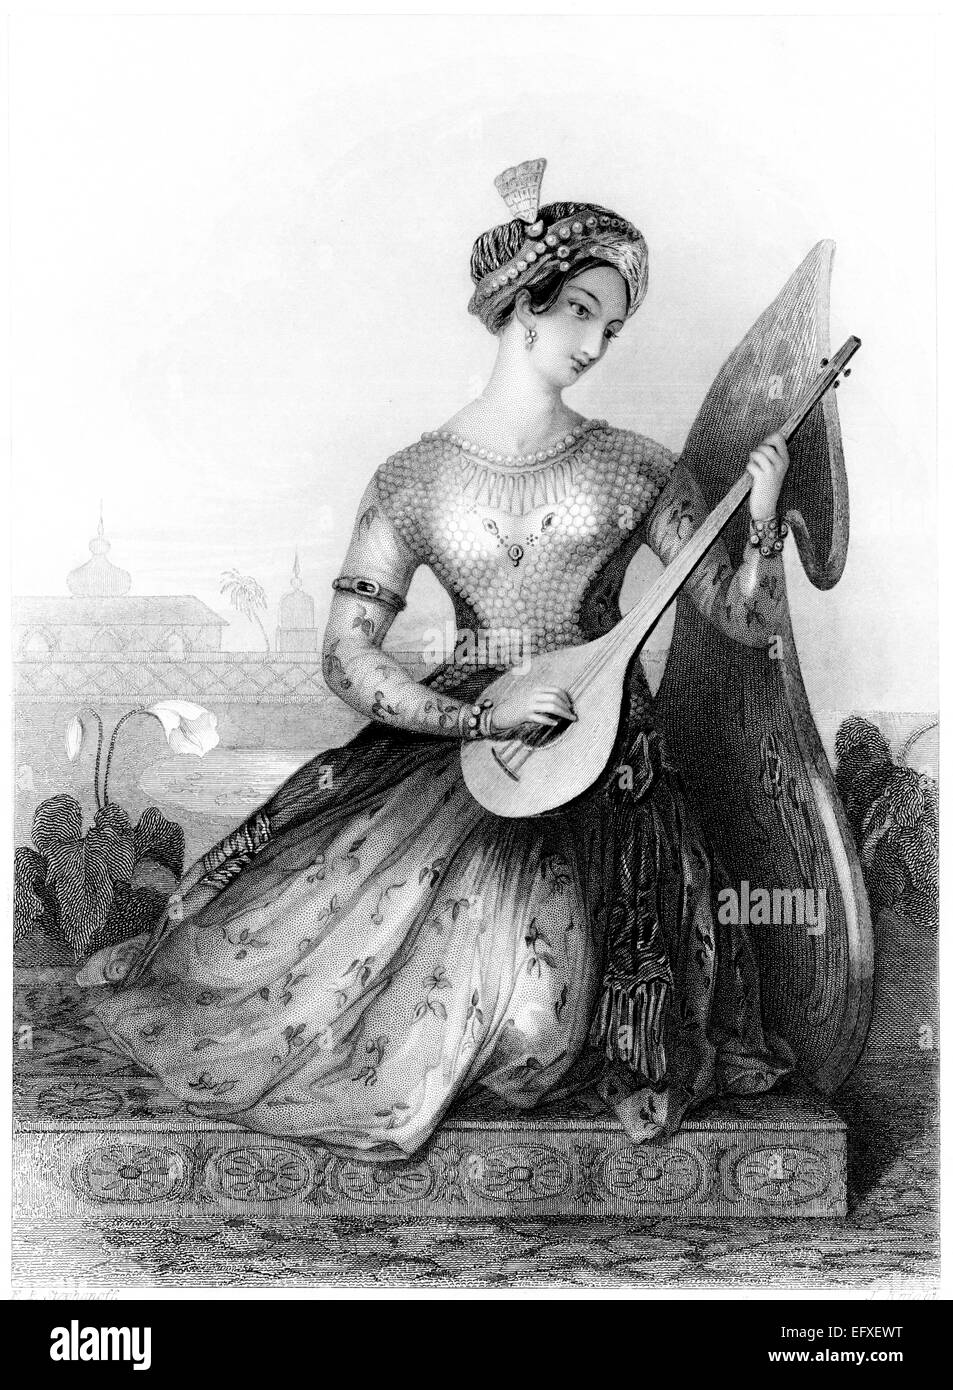 An engraving entitled 'The Rajah's Daughter' scanned at high resolution from a book printed in 1845. Believed to be free of all copyright restrictions Stock Photo